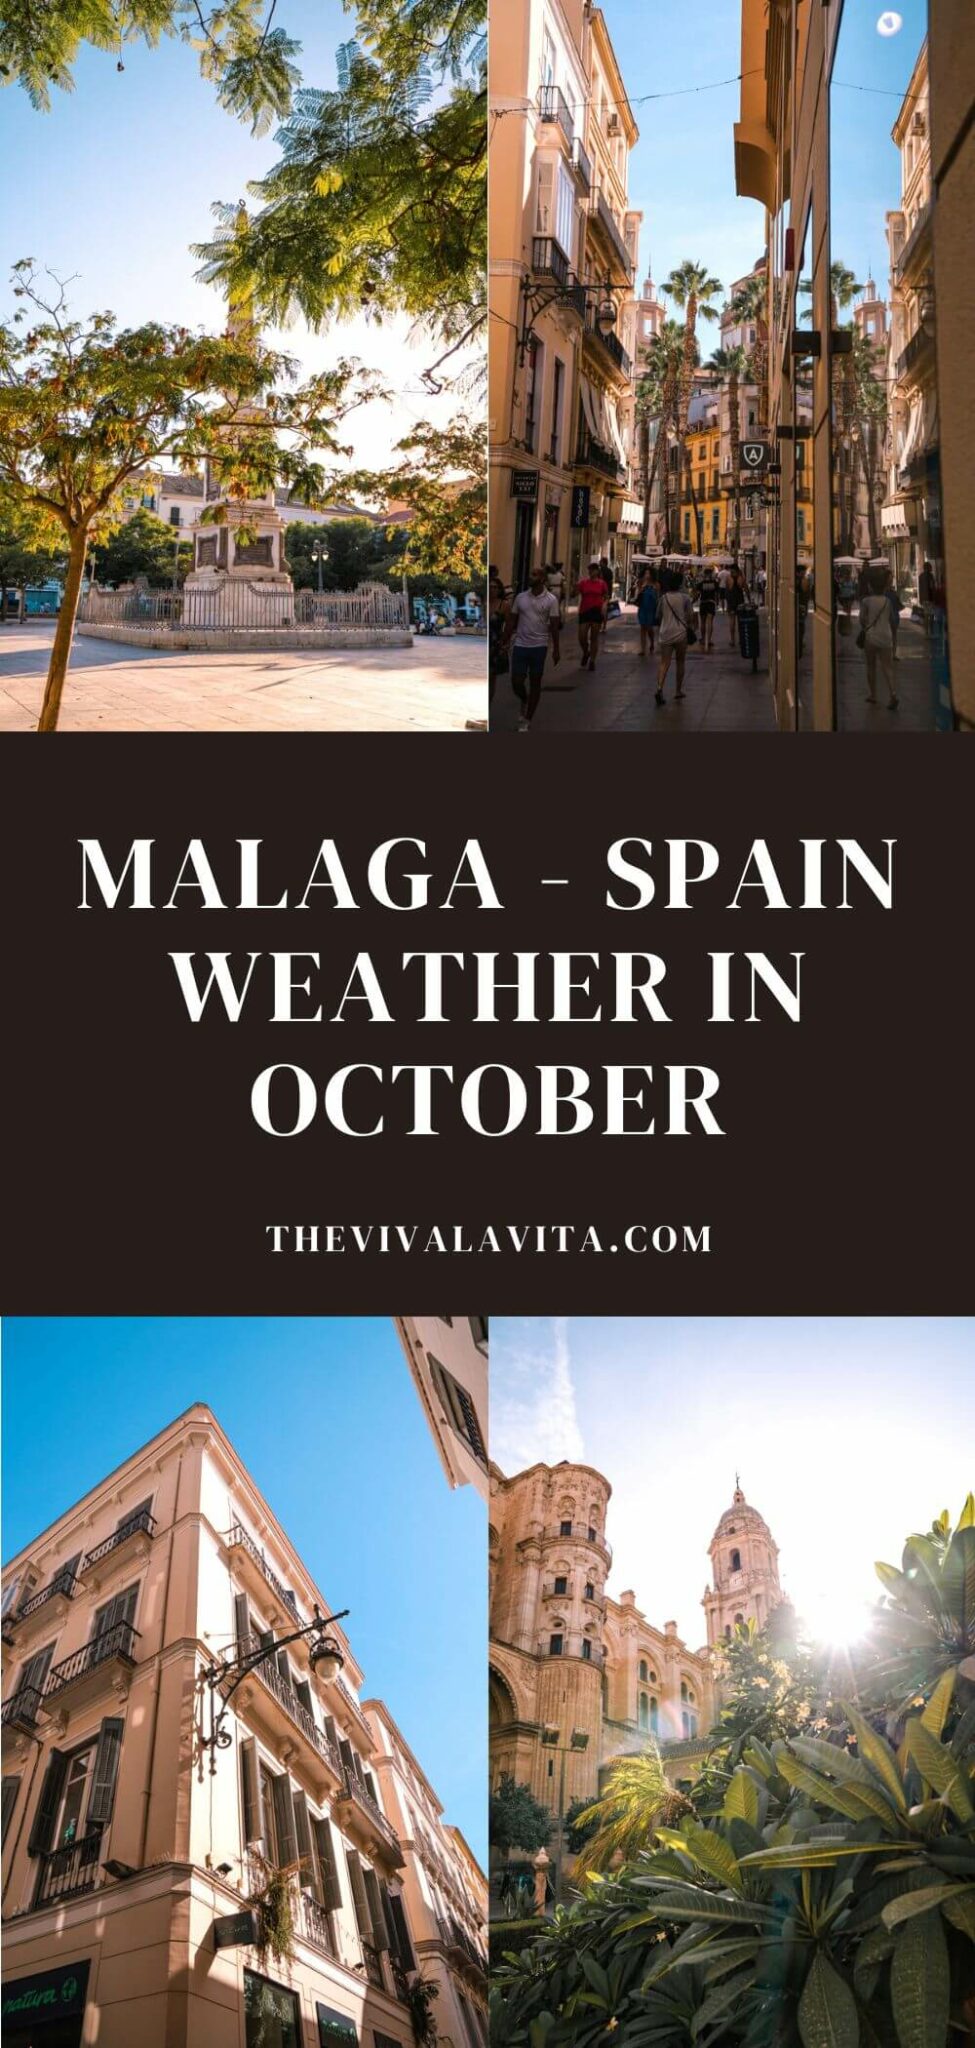 Weather for Malaga in October